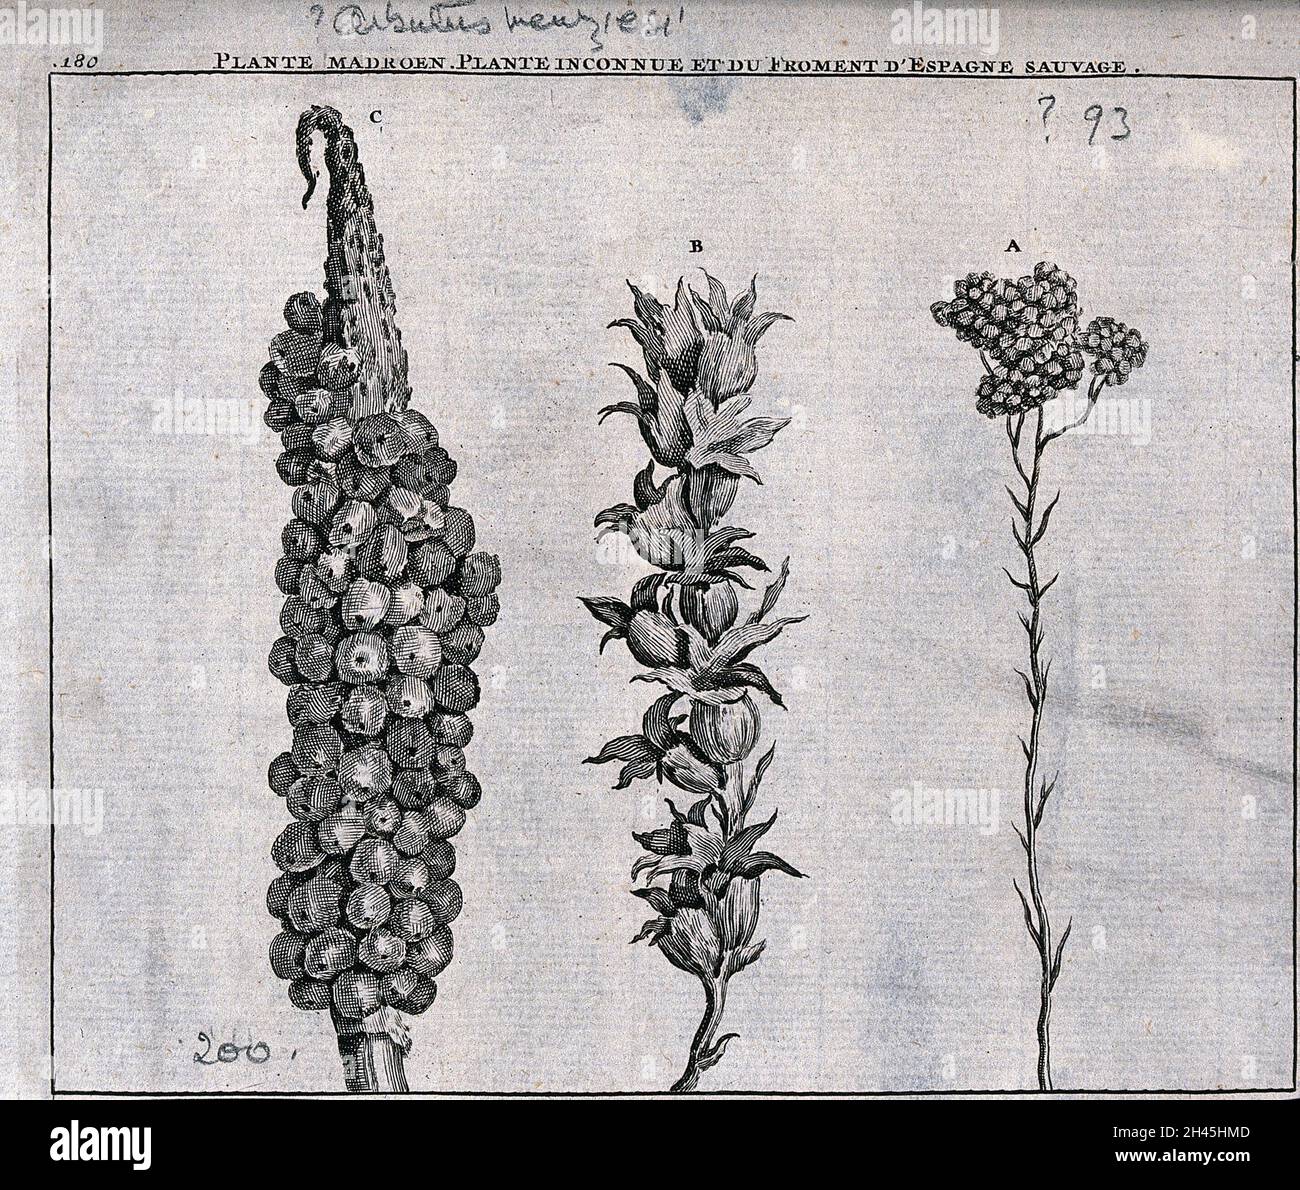 Madroen plant (?Arbutus menziesii), unknown plant and wild spanish wheat: fruiting heads. Line engraving by M. Pool after C. de Bruins, 1705. Stock Photo